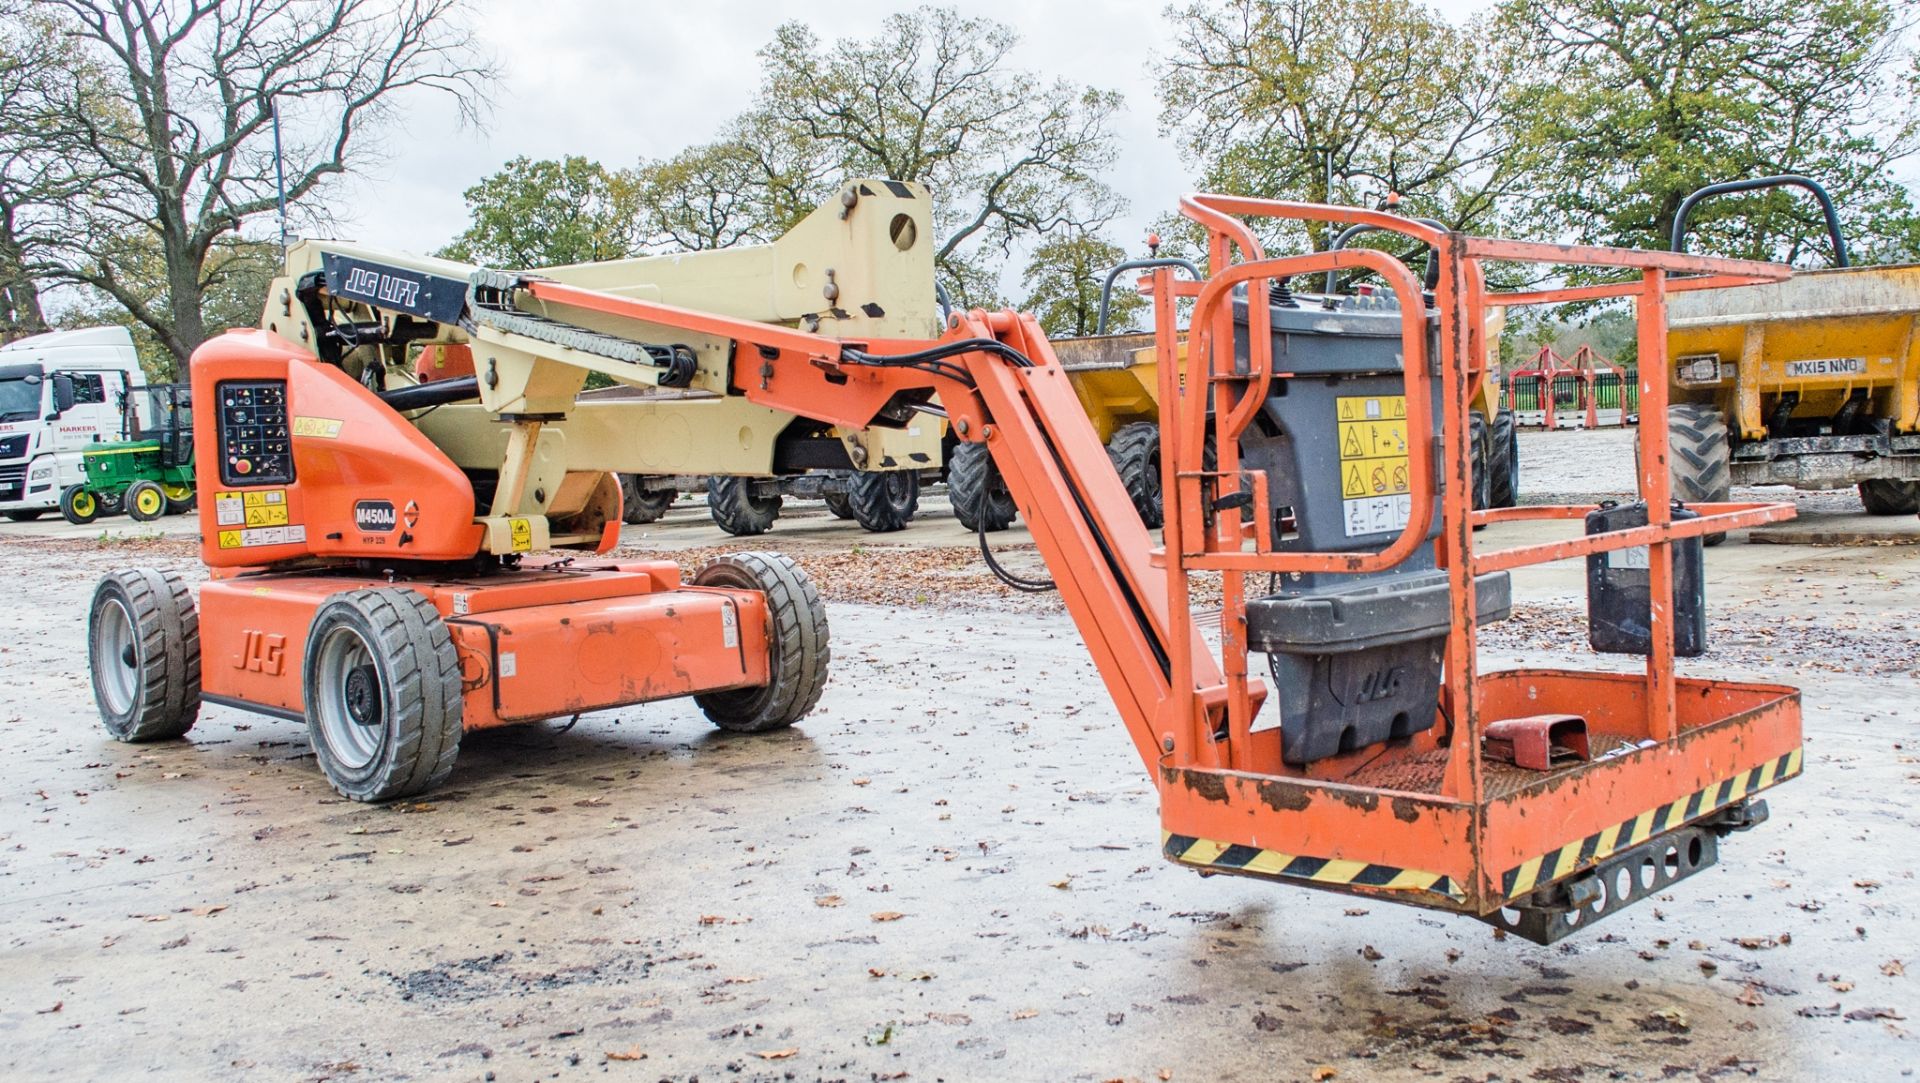 JLG M450AJ hybrid articulated boom lift Year: 2012 S/N: 156095 Recorded hours: 8 (Suspect clock - Image 2 of 17